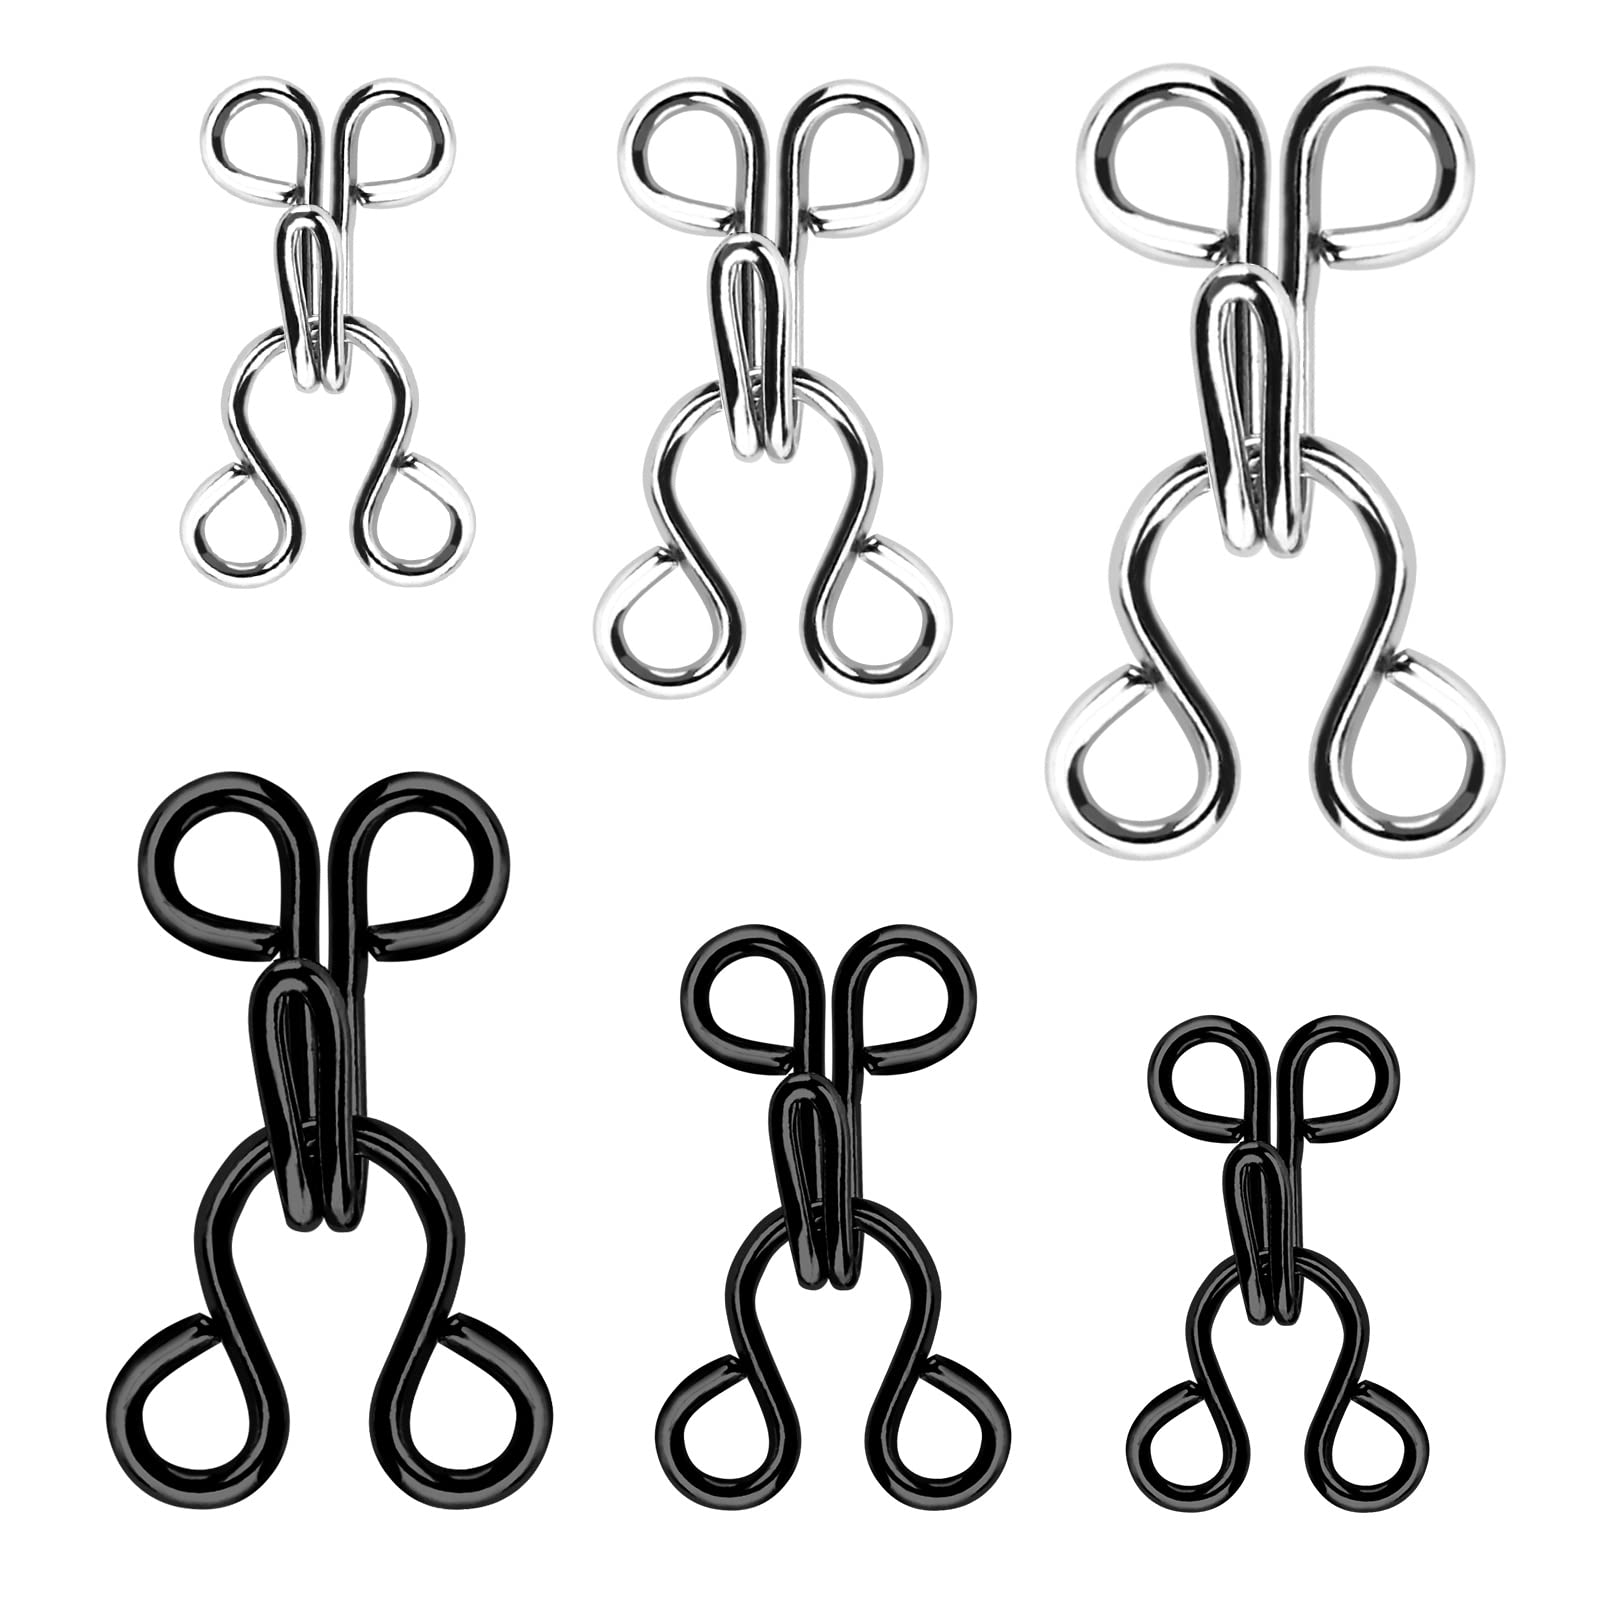  100 Set Copper Sewing Hooks and Eyes Closure Silver Black Hook  and Eye Closures for Clothing DIY Craft Bra Jacket Skirt Trousers (14mm  Black) PT1019